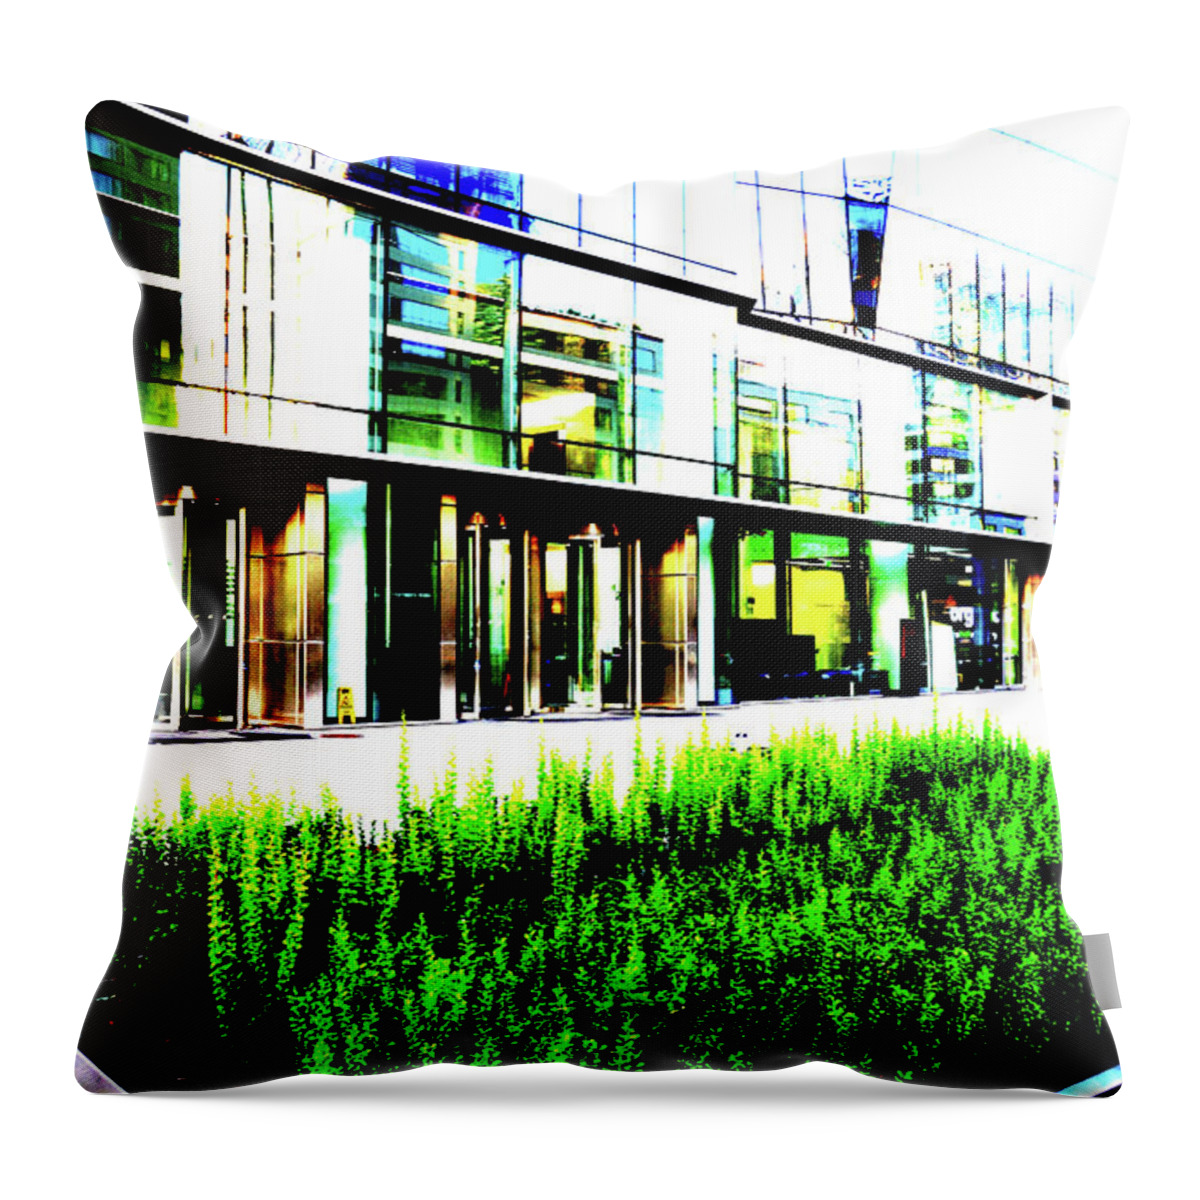 Lawn Throw Pillow featuring the photograph Lawn At Office Building In Warsaw, Poland by John Siest